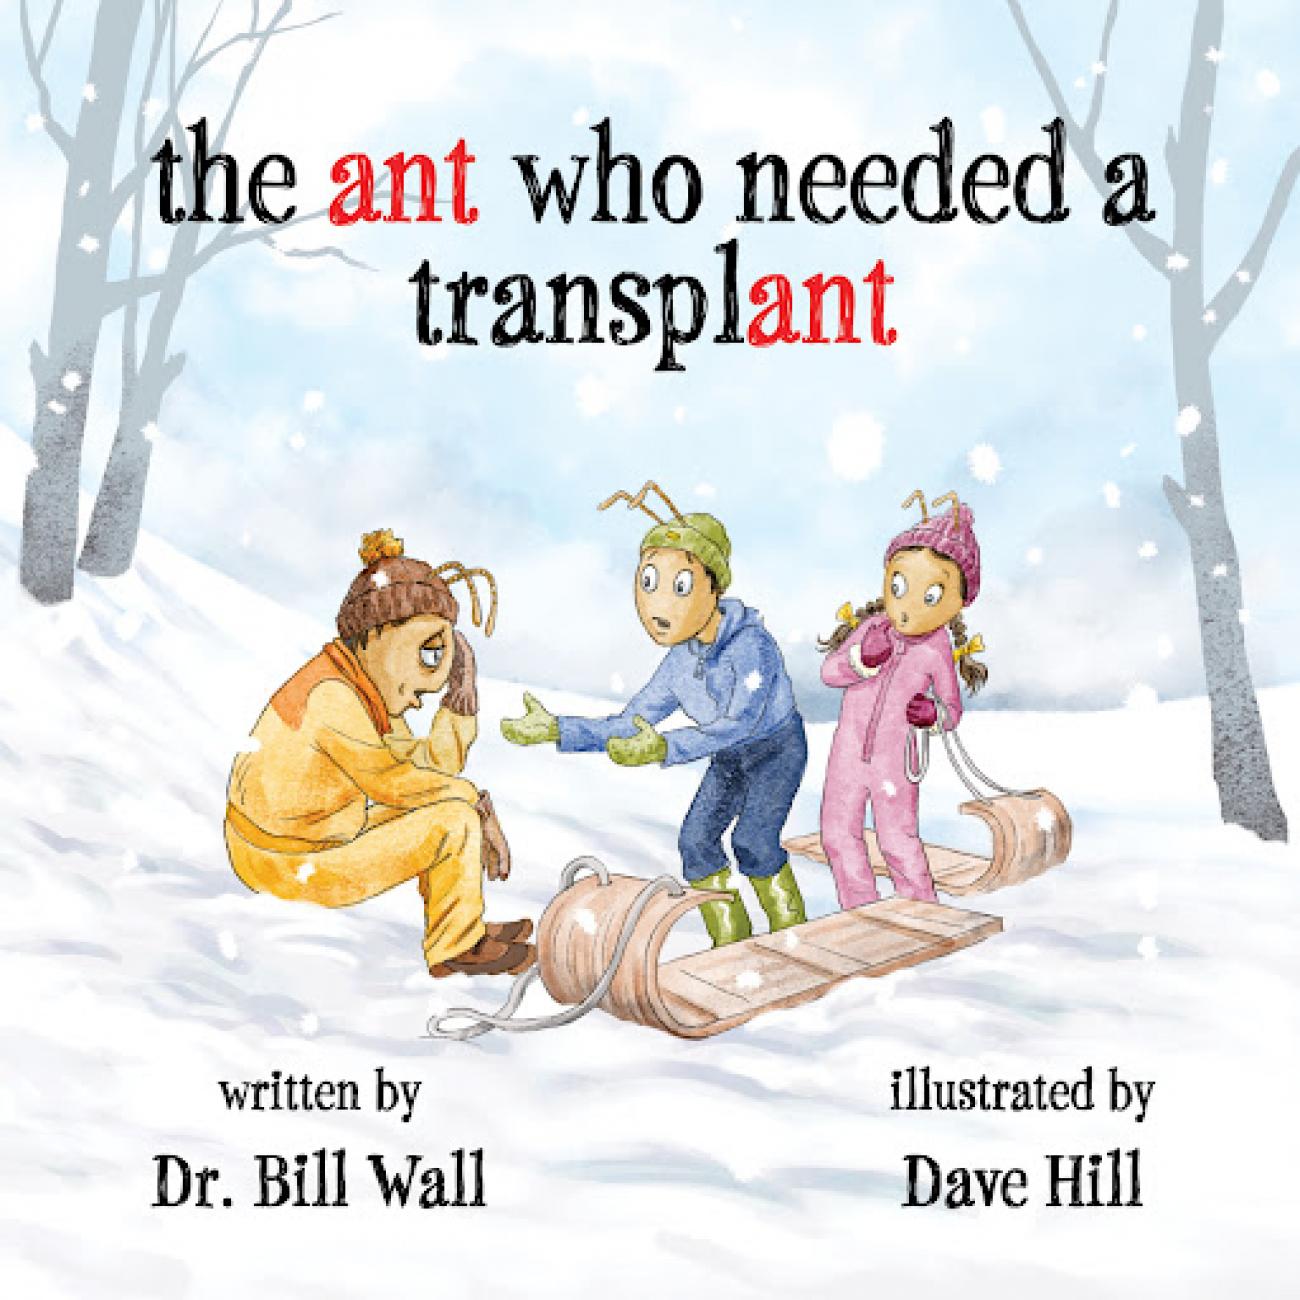 Cover image of the book - the ant who needed a transplant